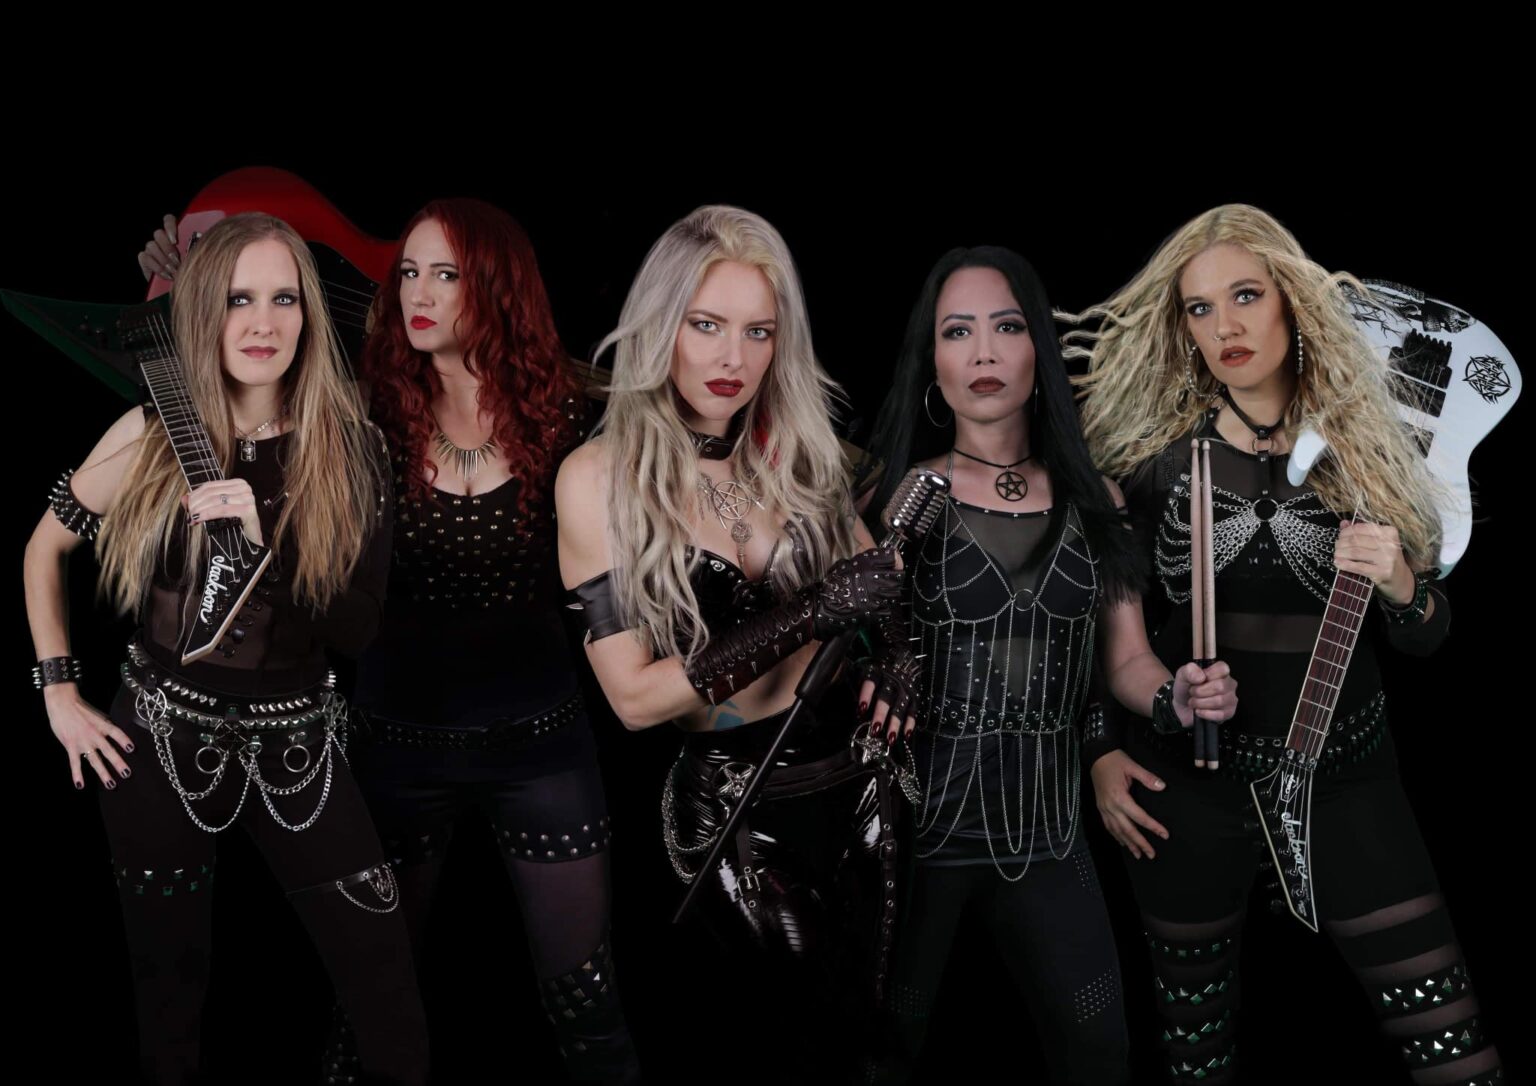 BURNING WITCHES release the title track of their album “The